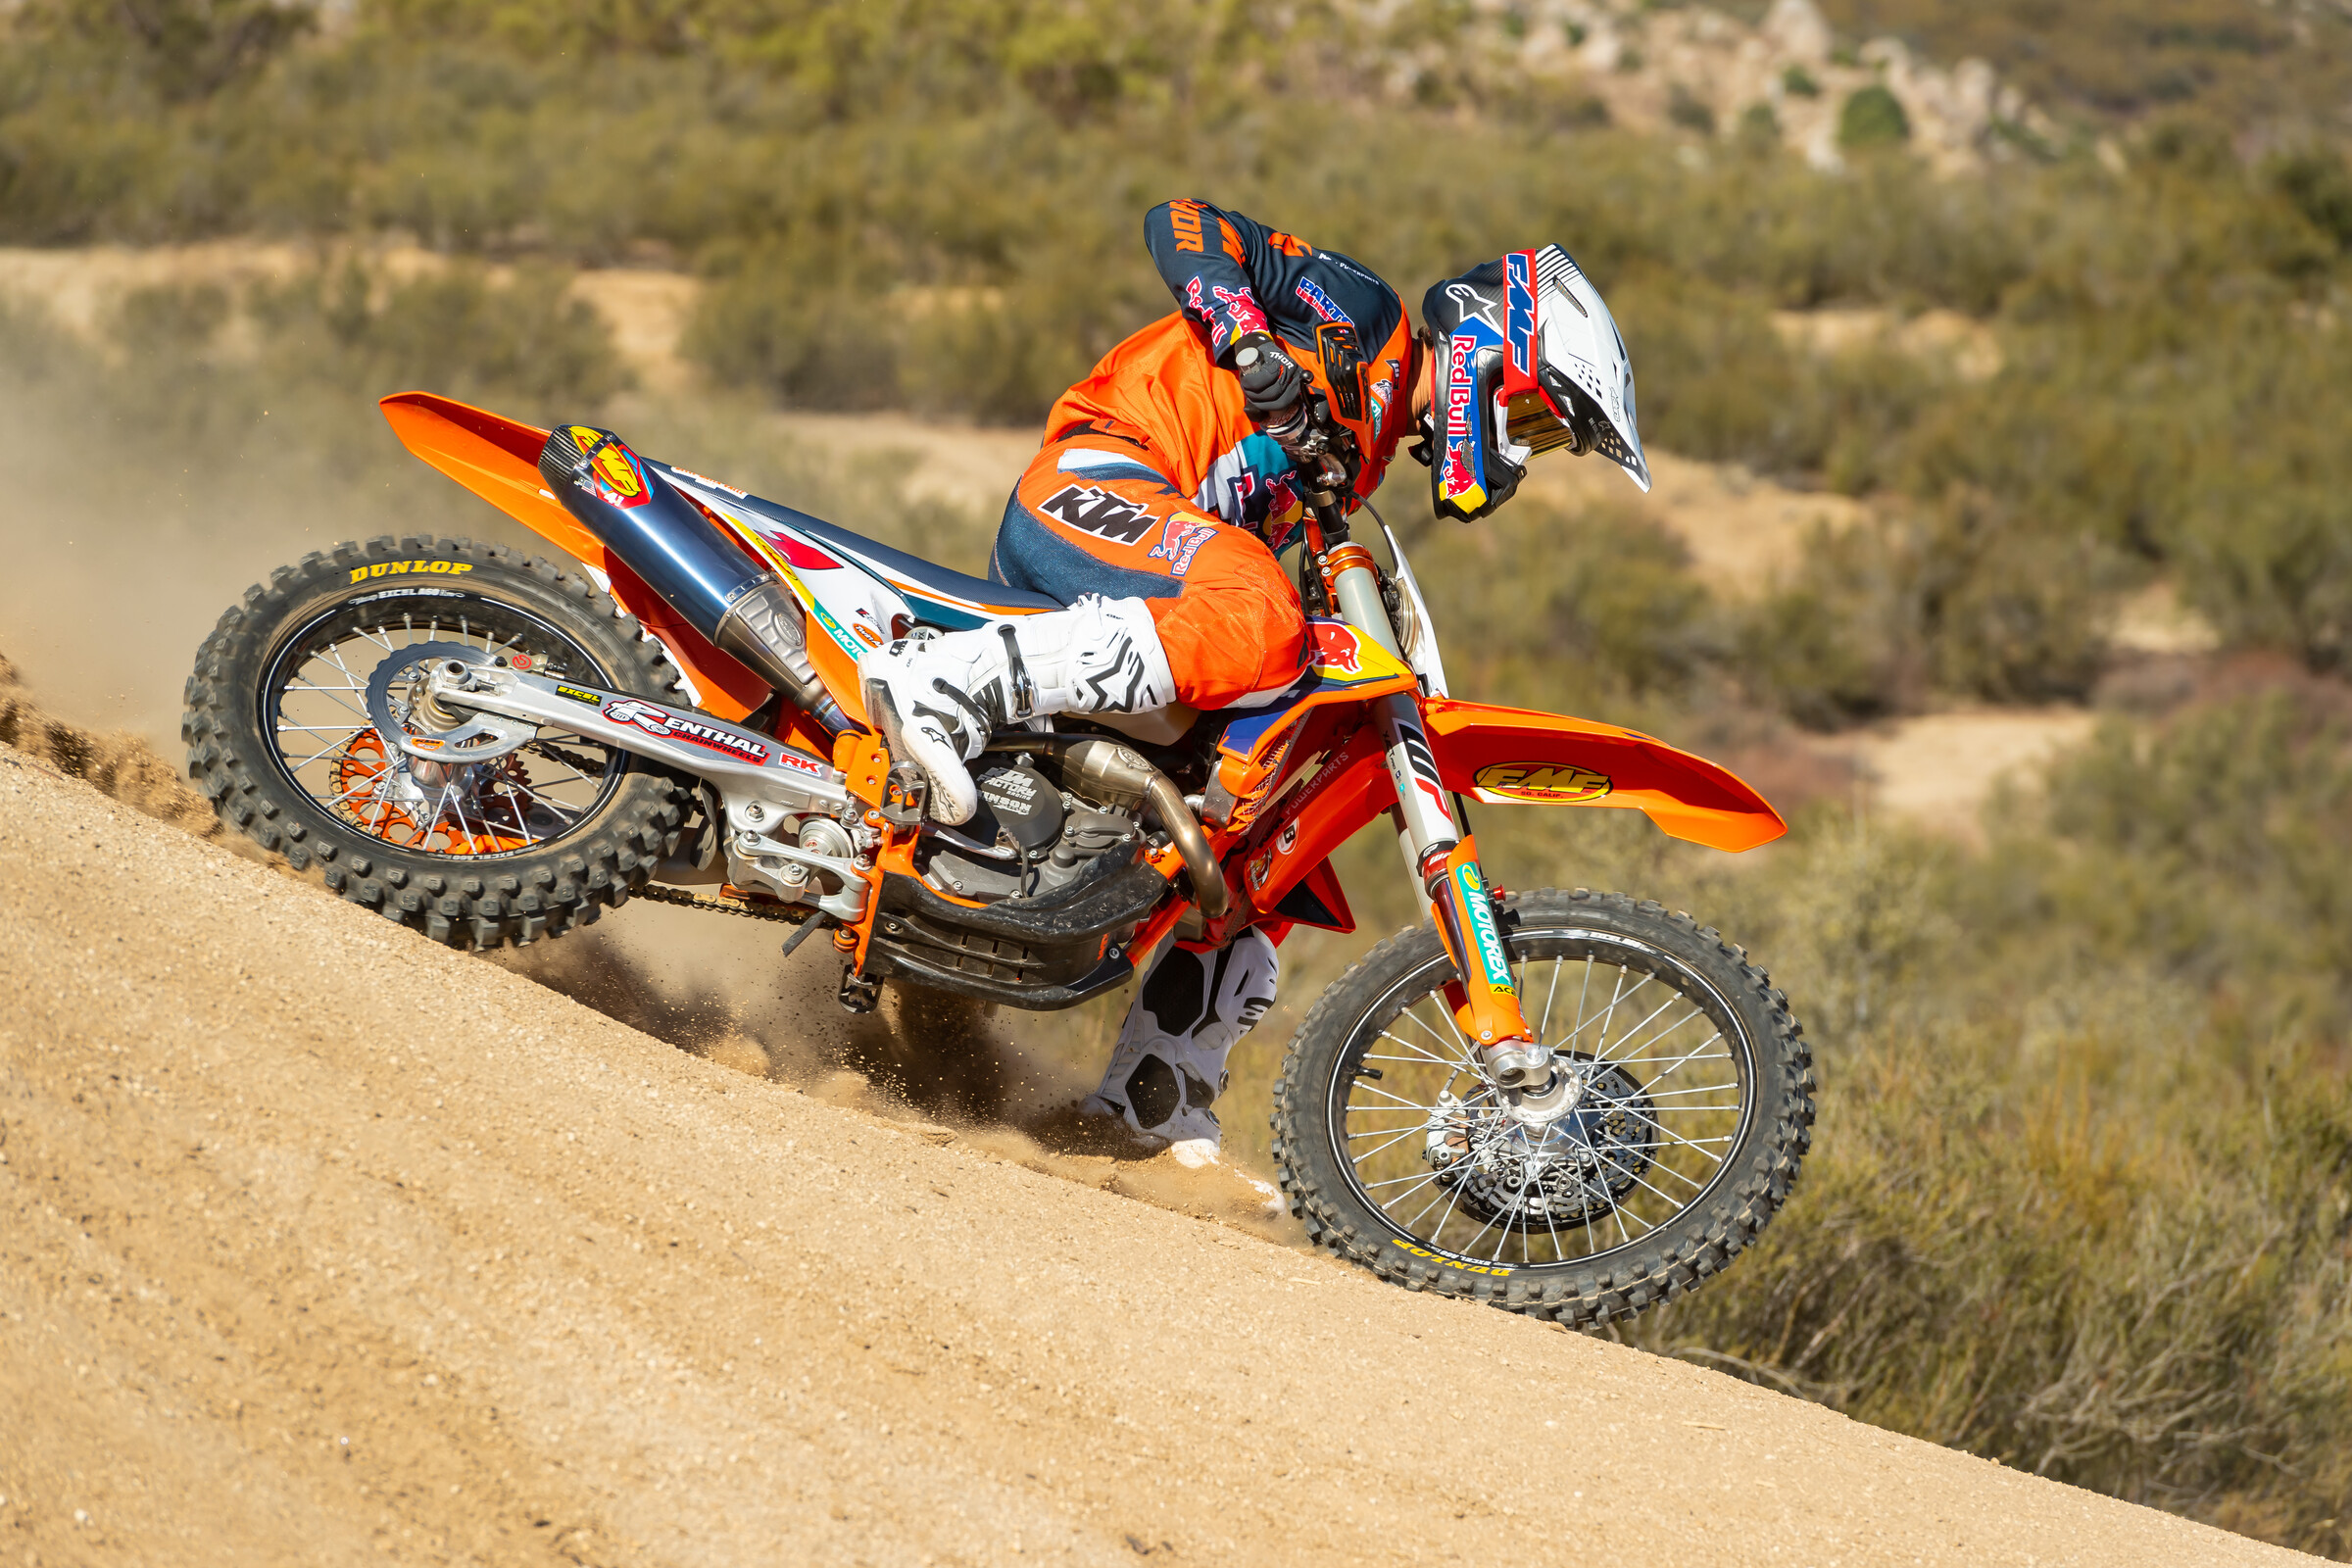 Taylor Robert and the FMF Vision